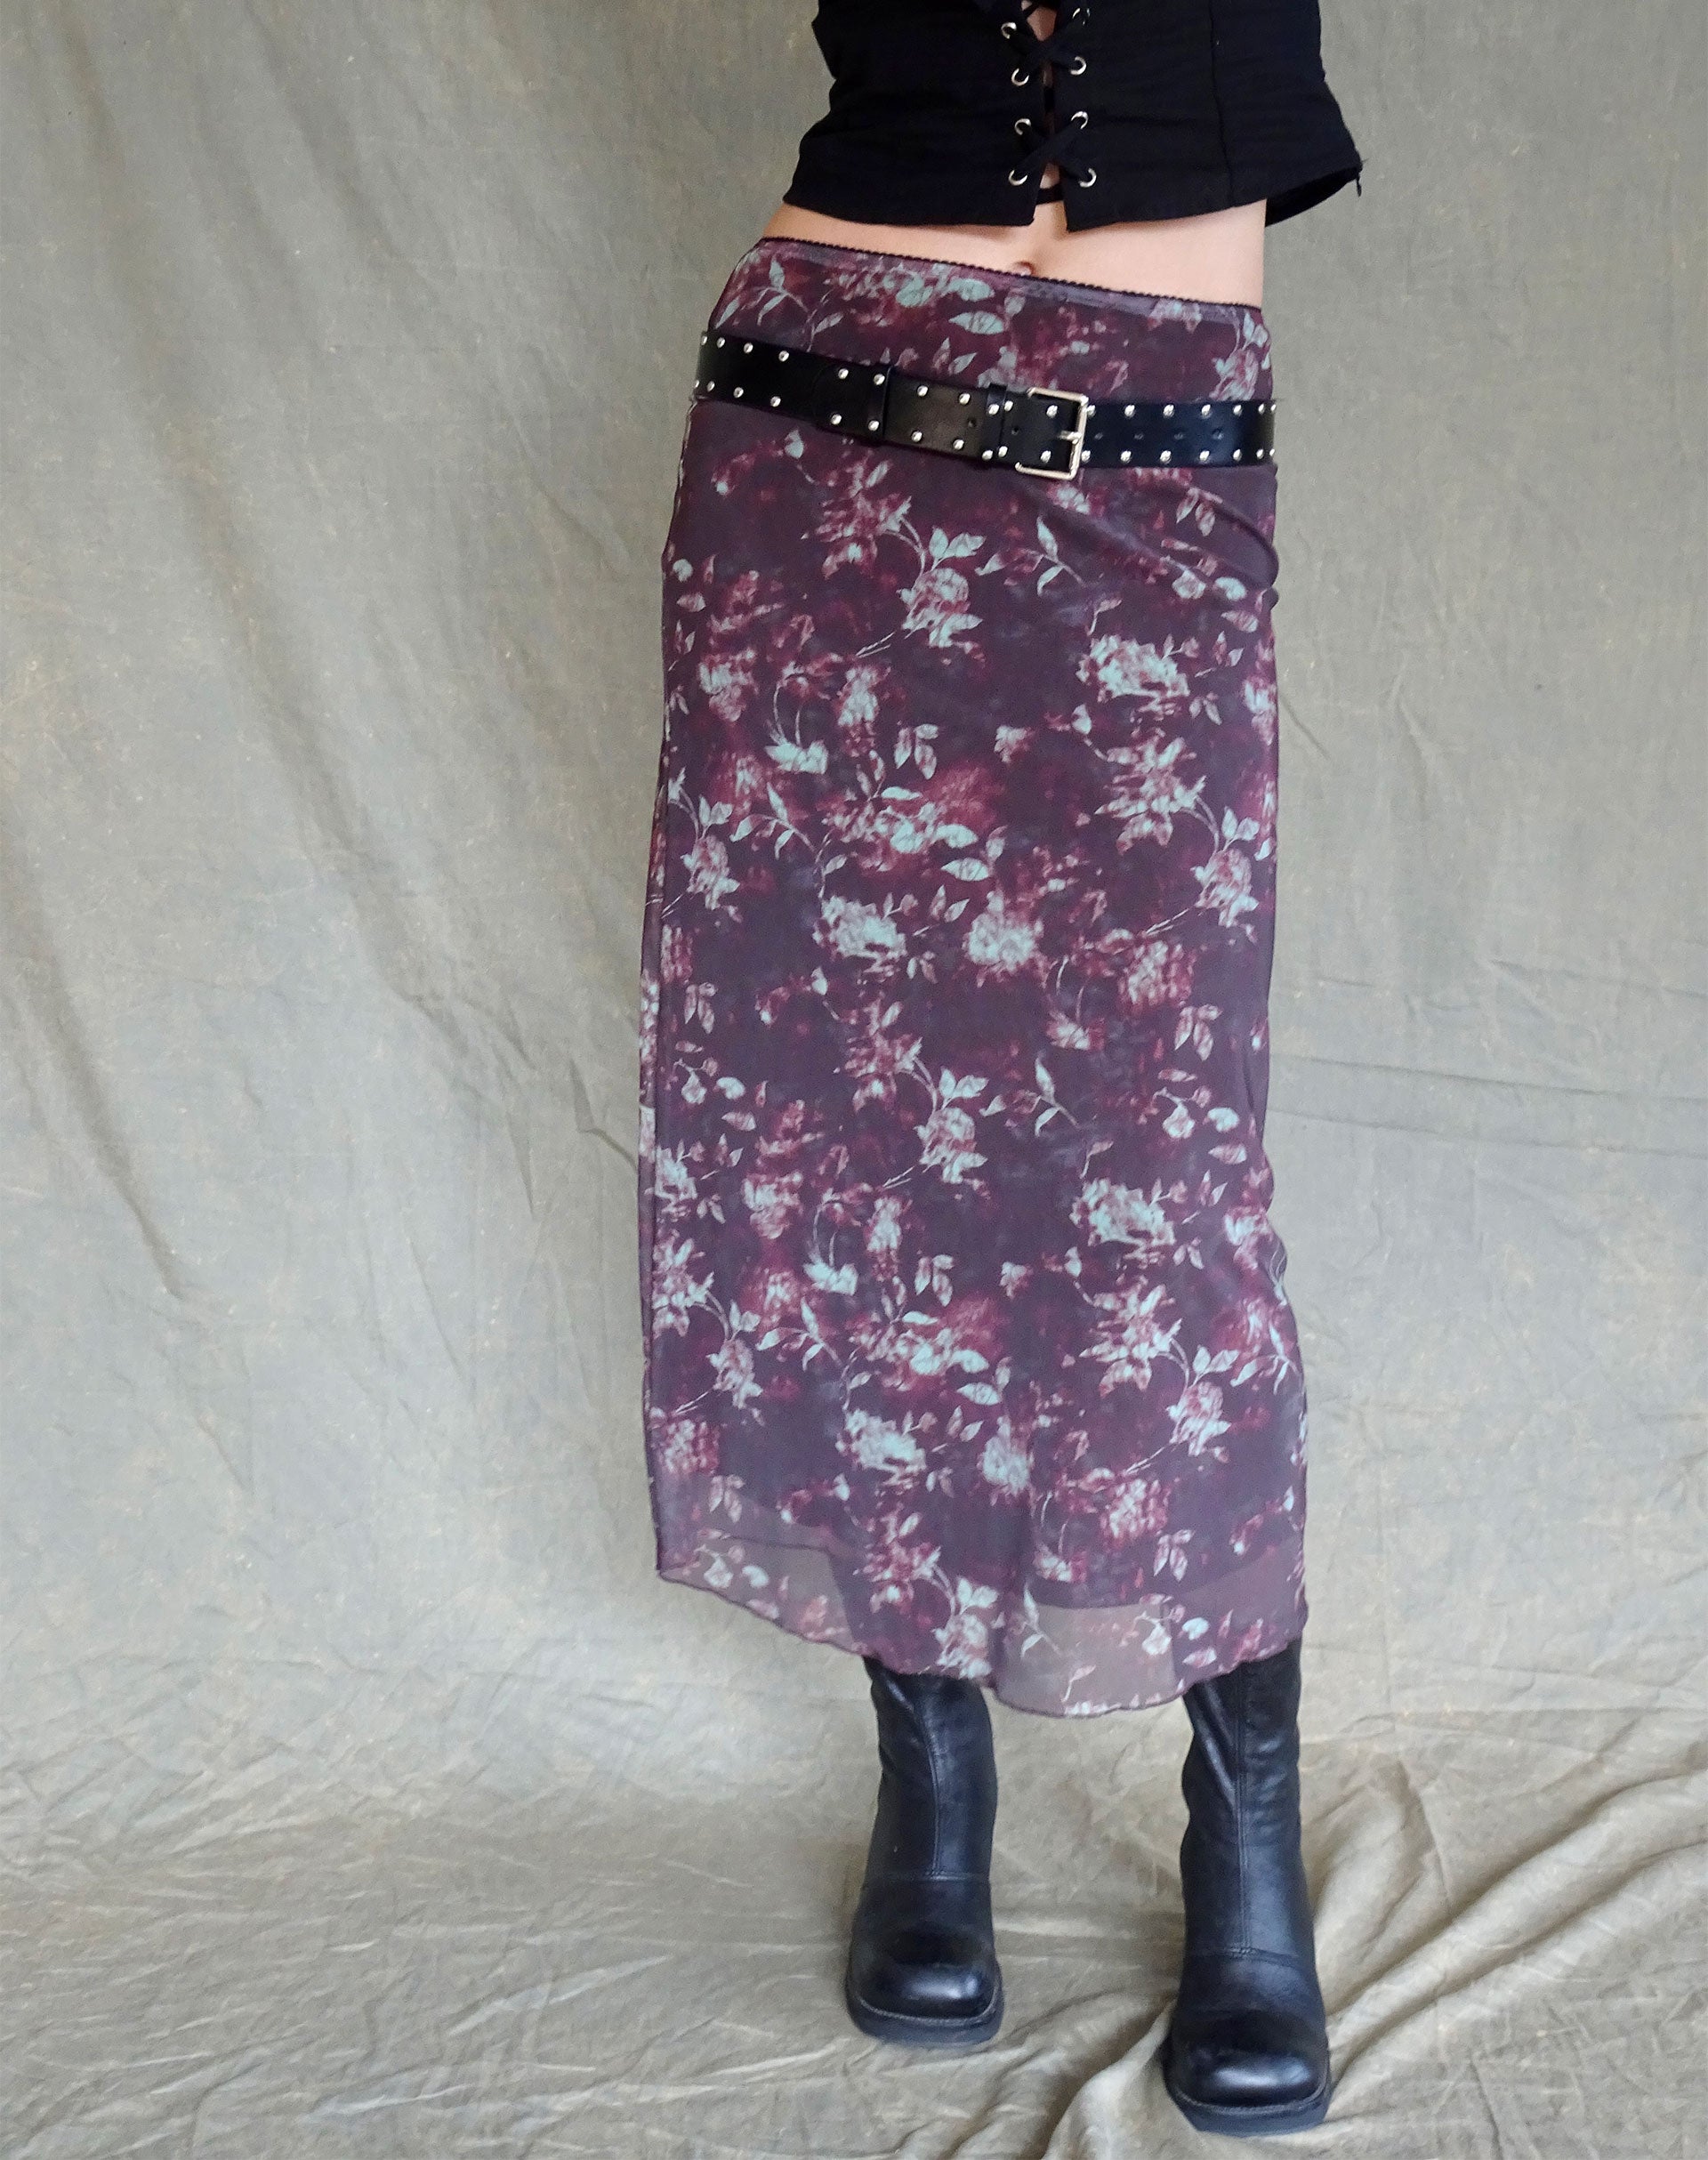 image of Lassie Maxi Skirt in Botanical Floral Brown